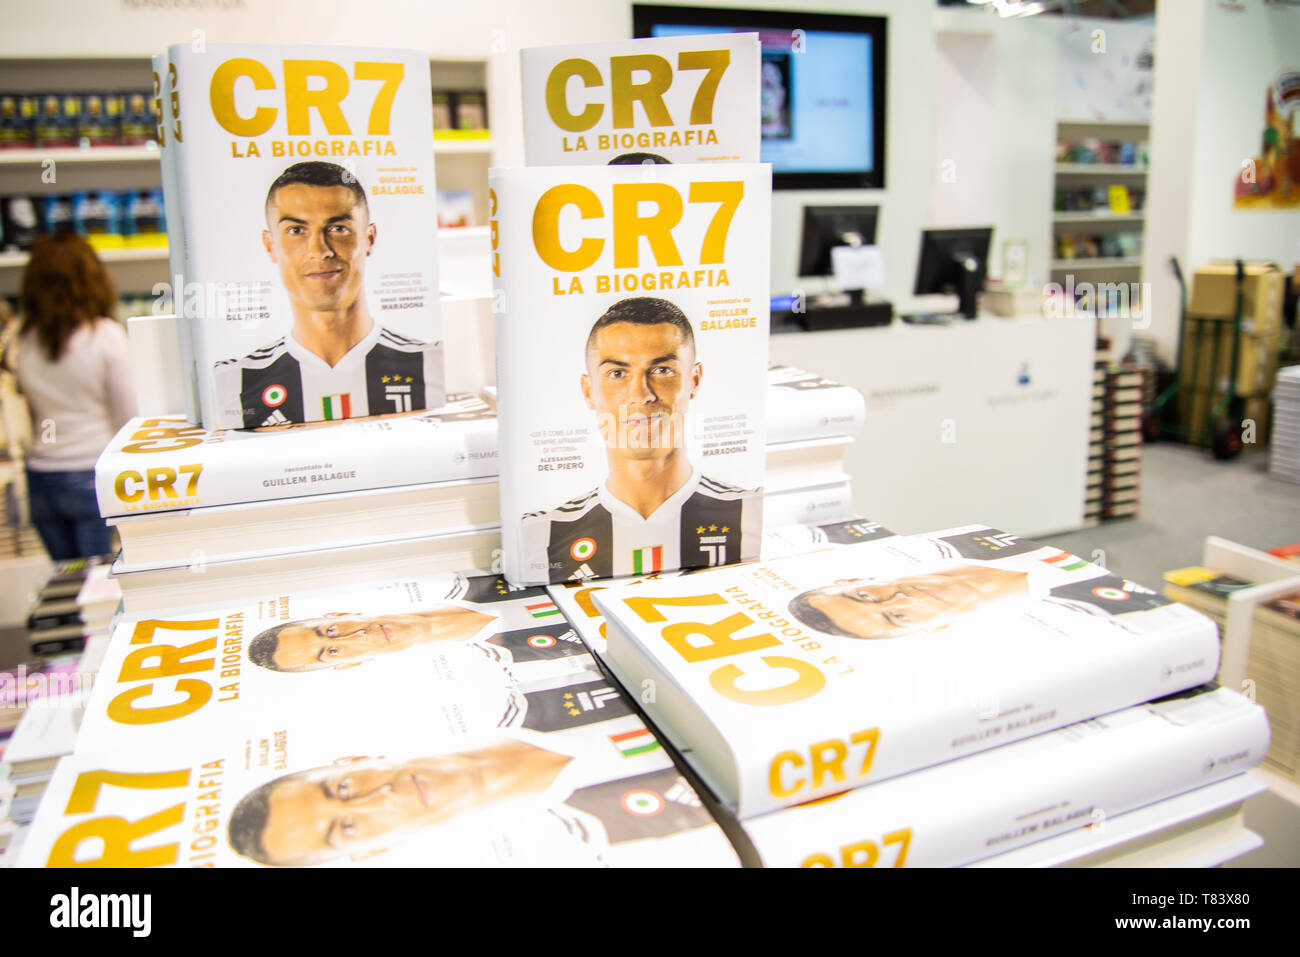 The book of Cristiano Ronaldo depicted during the event. The International Book Fair is the most important Italian event in the publishing field. It takes place at the Lingotto Fiere conference centre in Turin once a year, in the month of May. Stock Photo